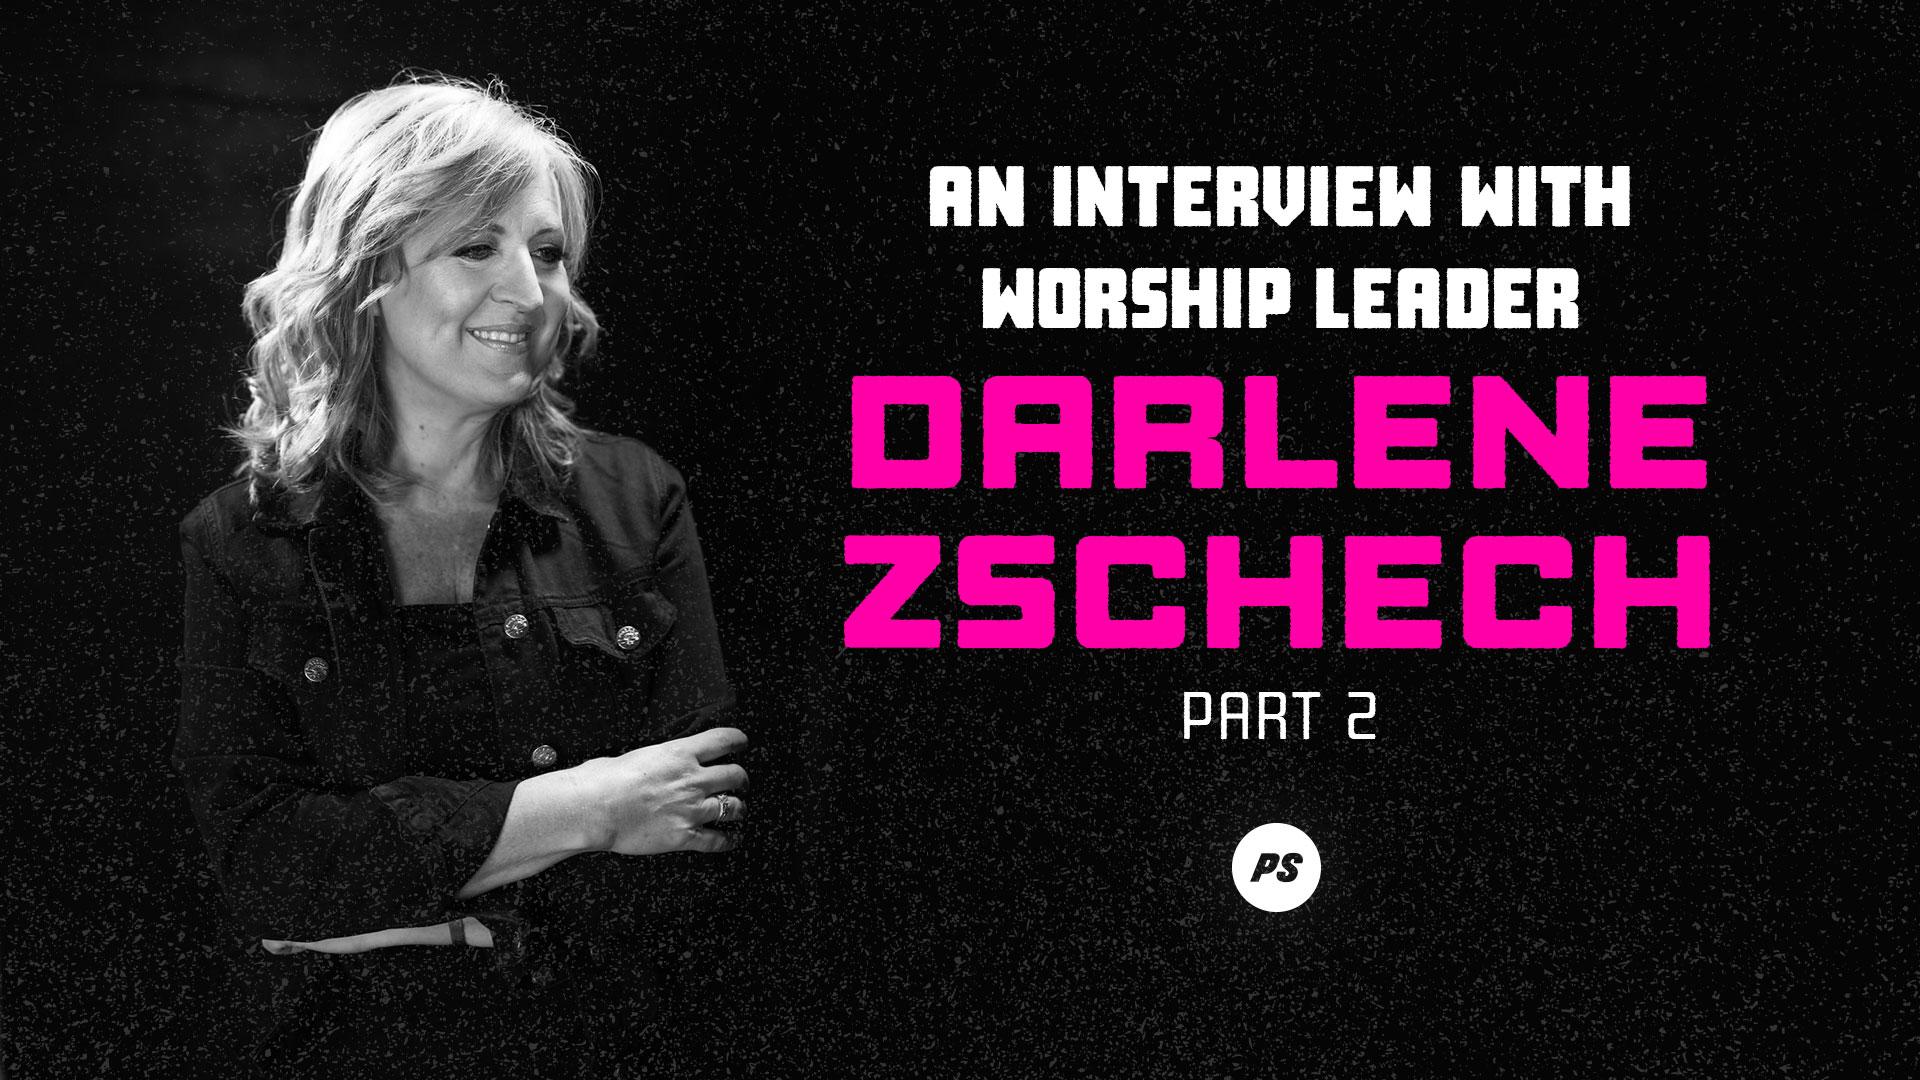 Featured Image for “An Interview with Darlene Zschech (Part 2)”